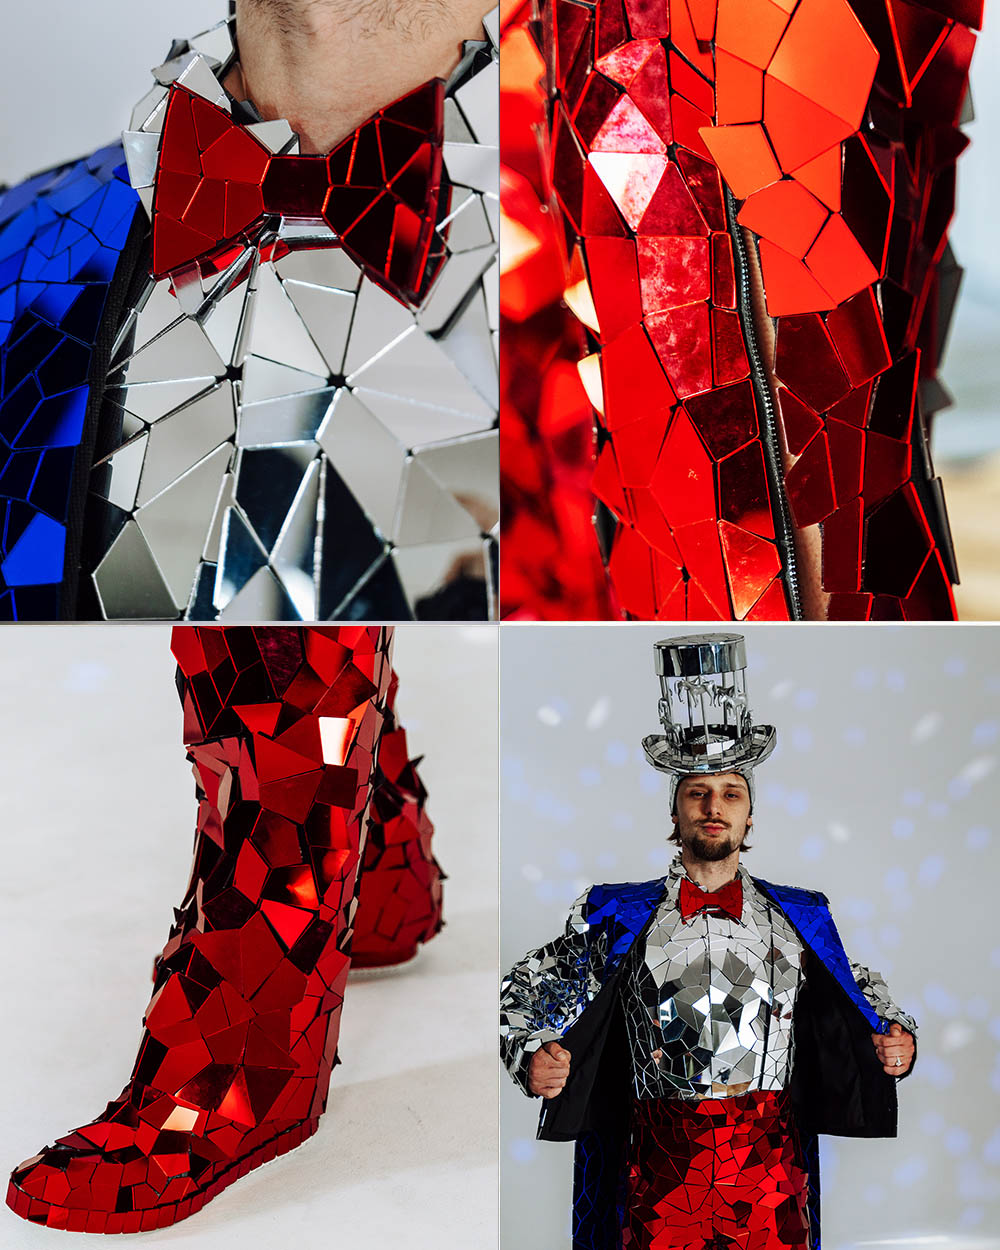 Festival Men's Outfit made of acrylic mirror - by ETERESHOP